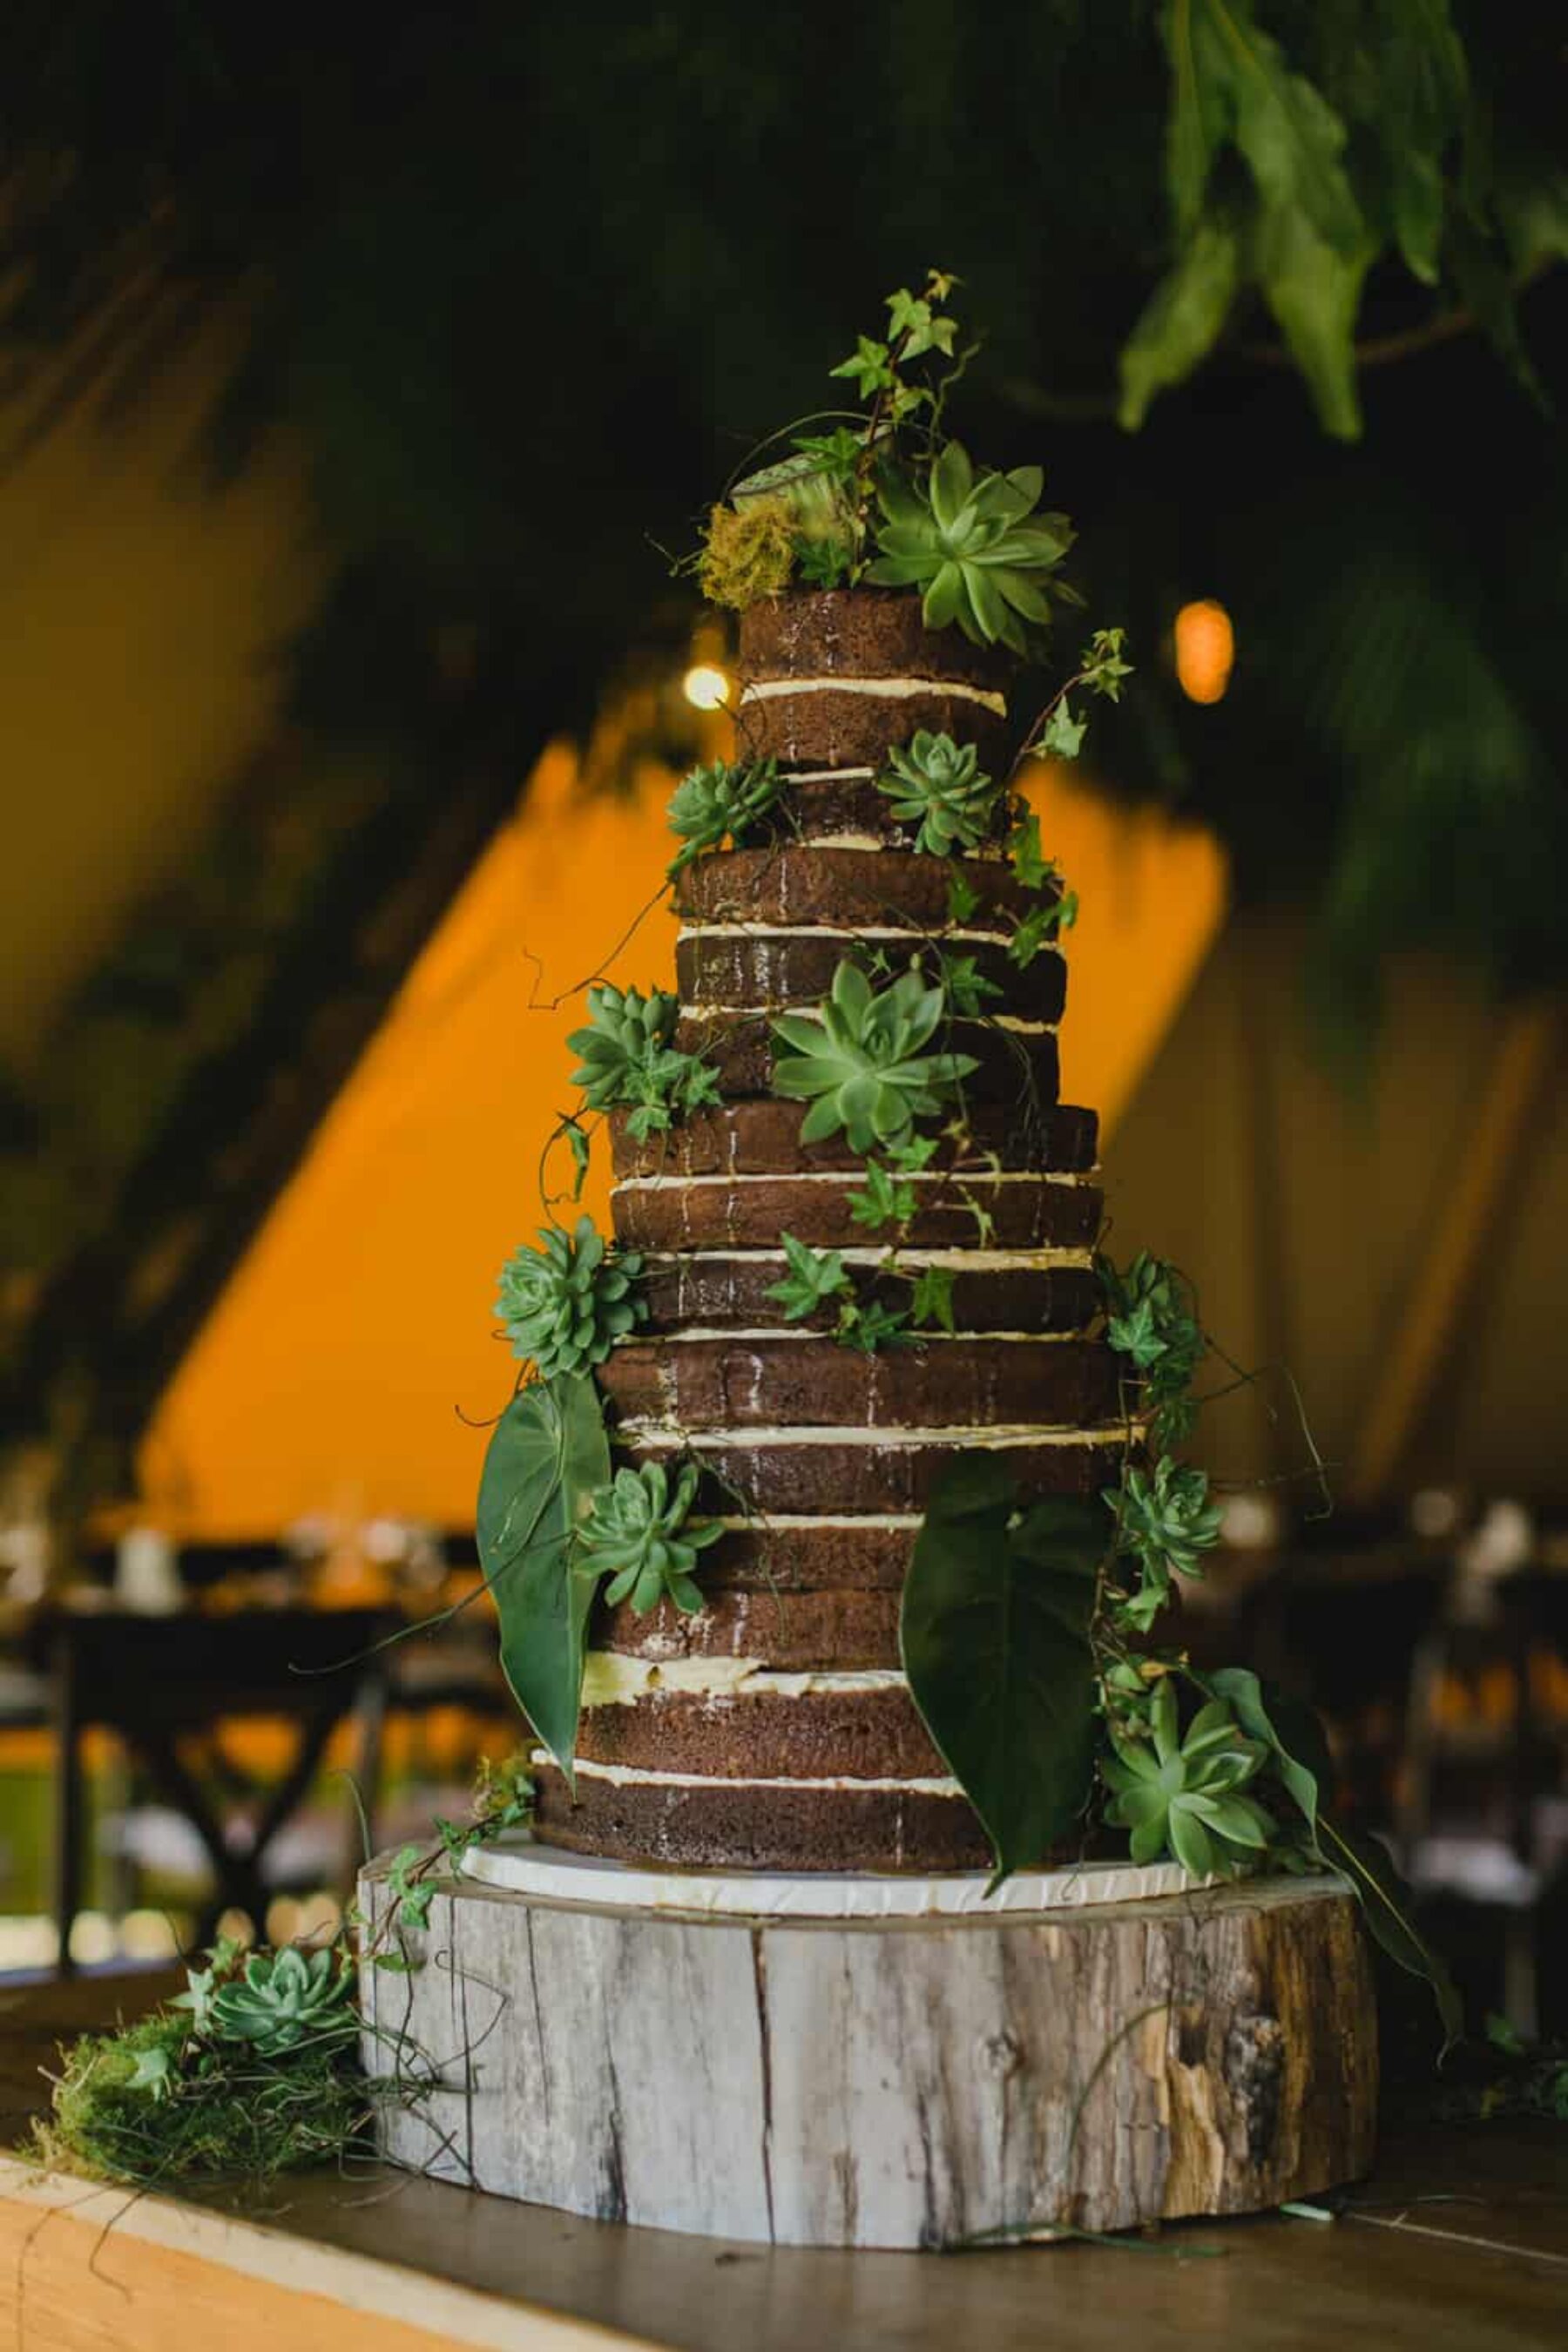 Naked layer cake dressed in greenery